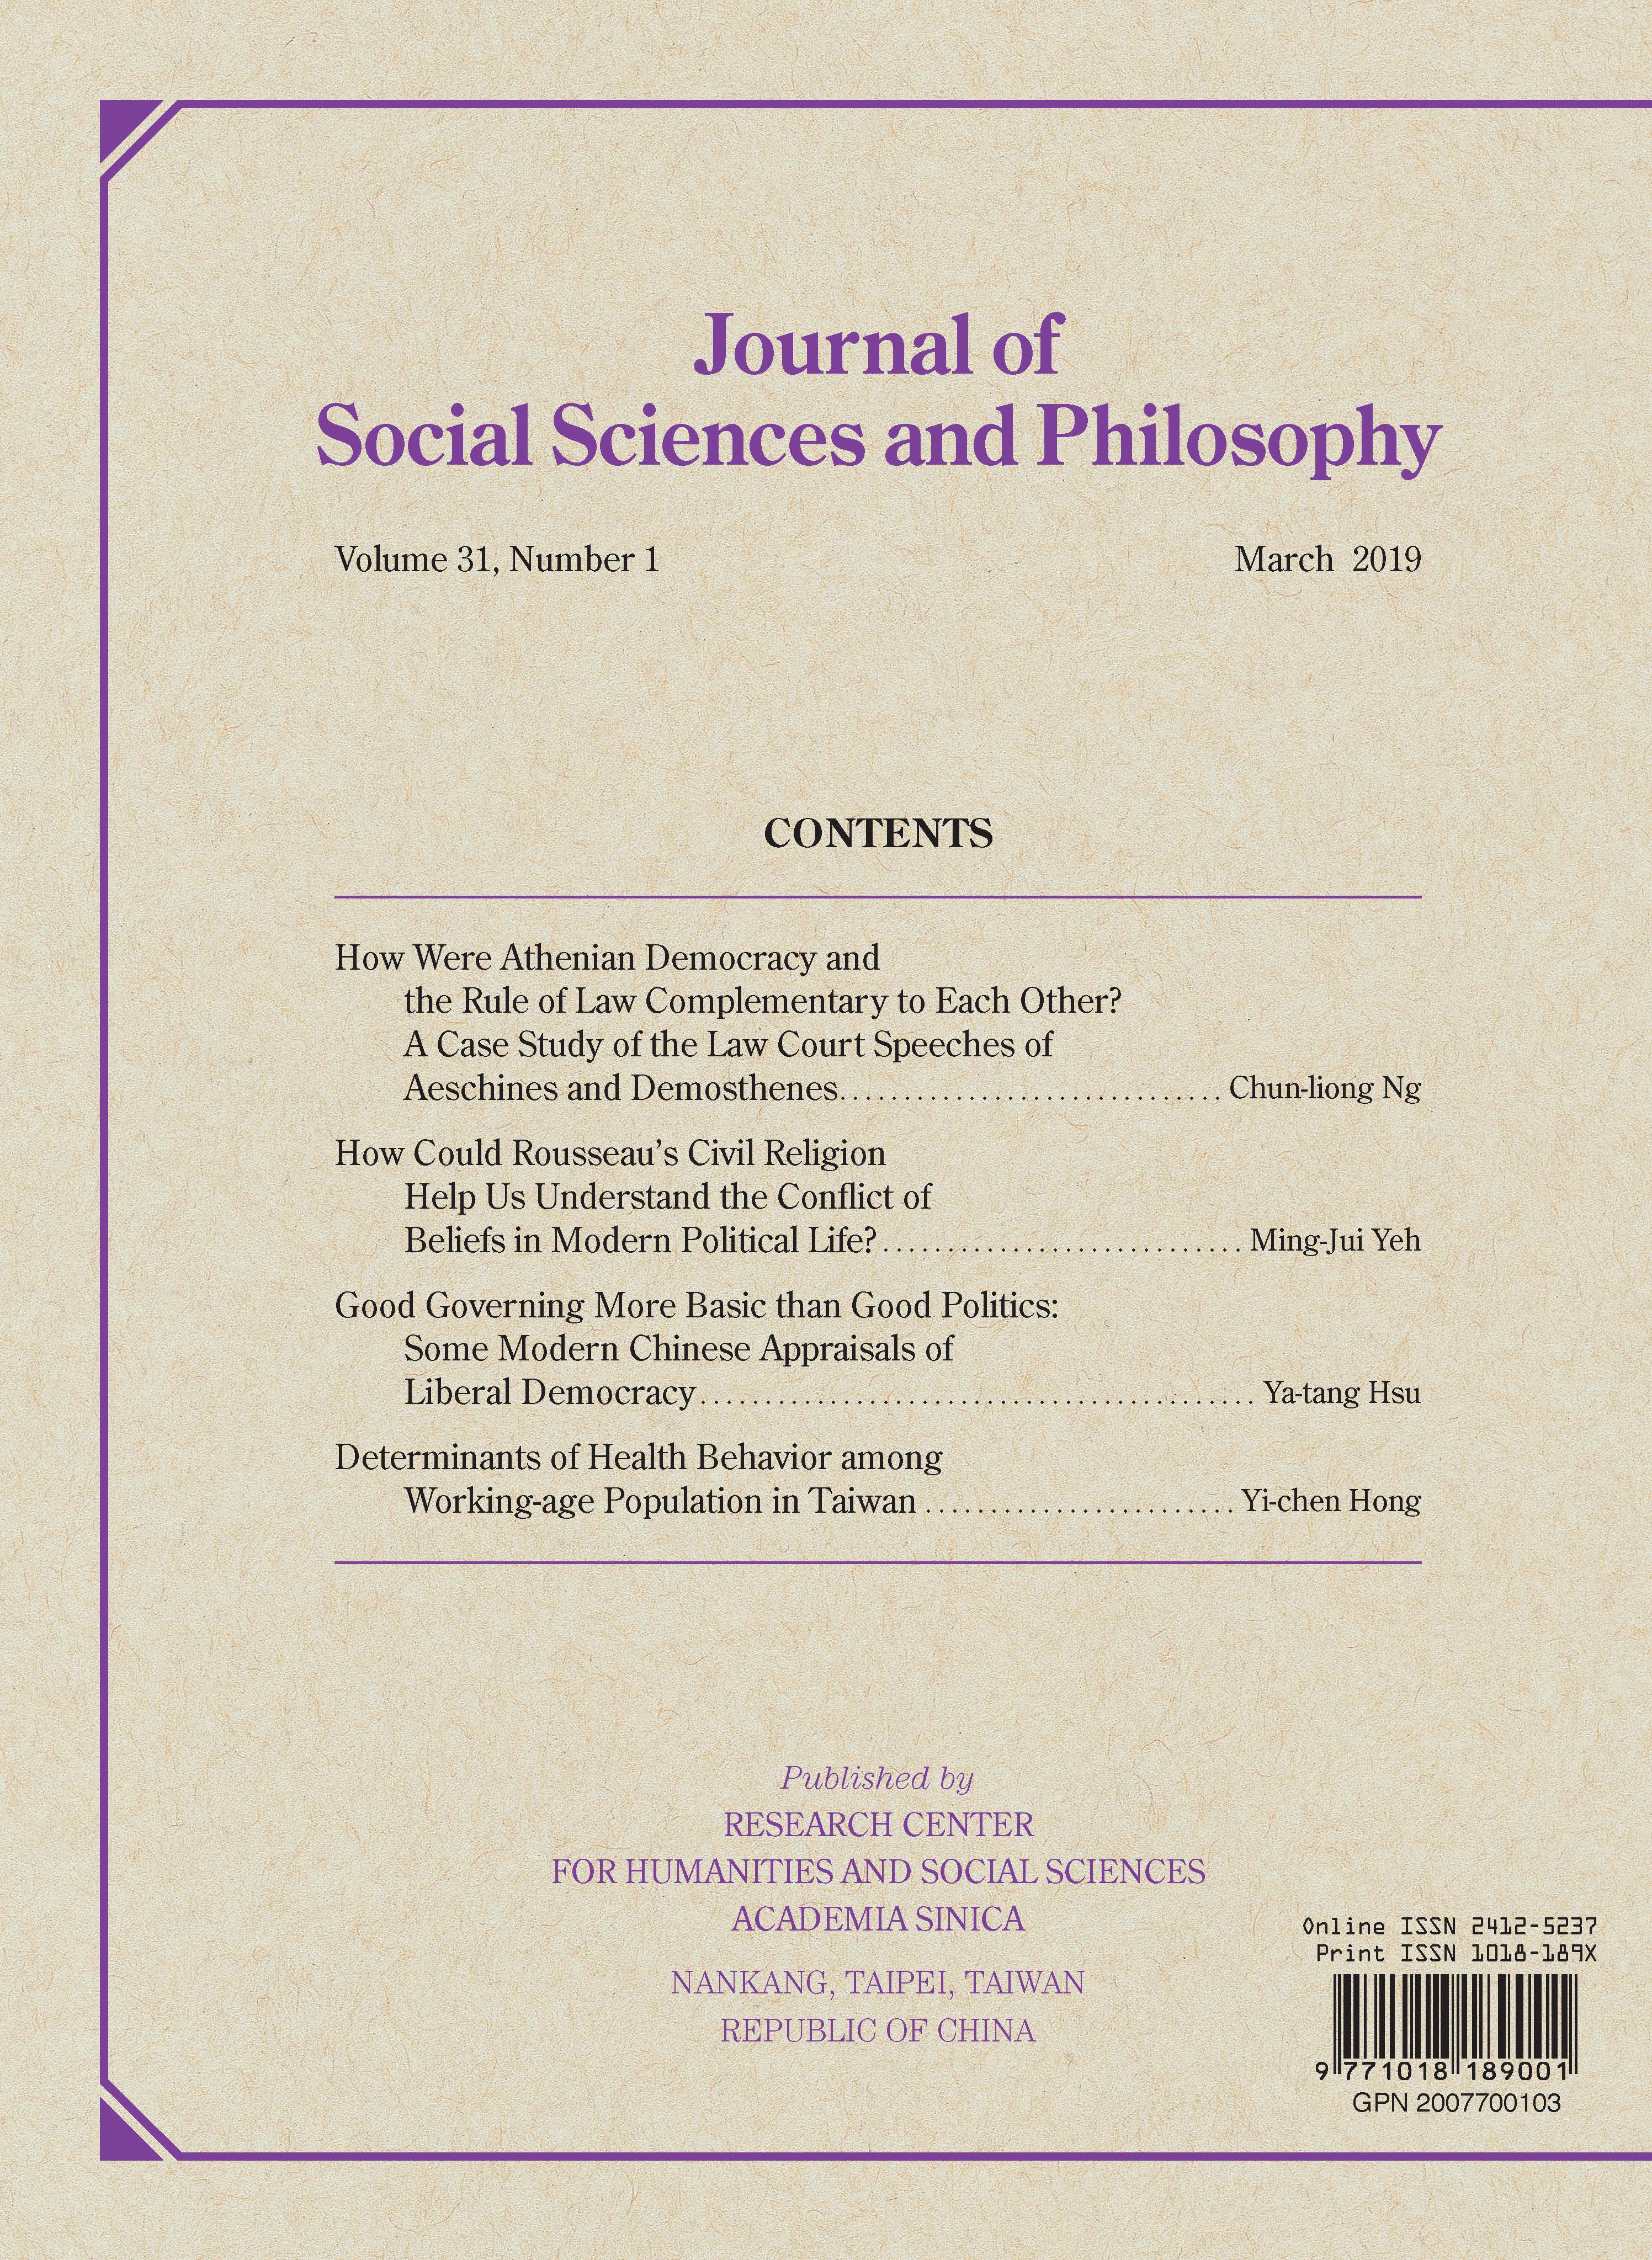 Journal of Social Sciences and Philosophy, Vol.31, No.1 is now available